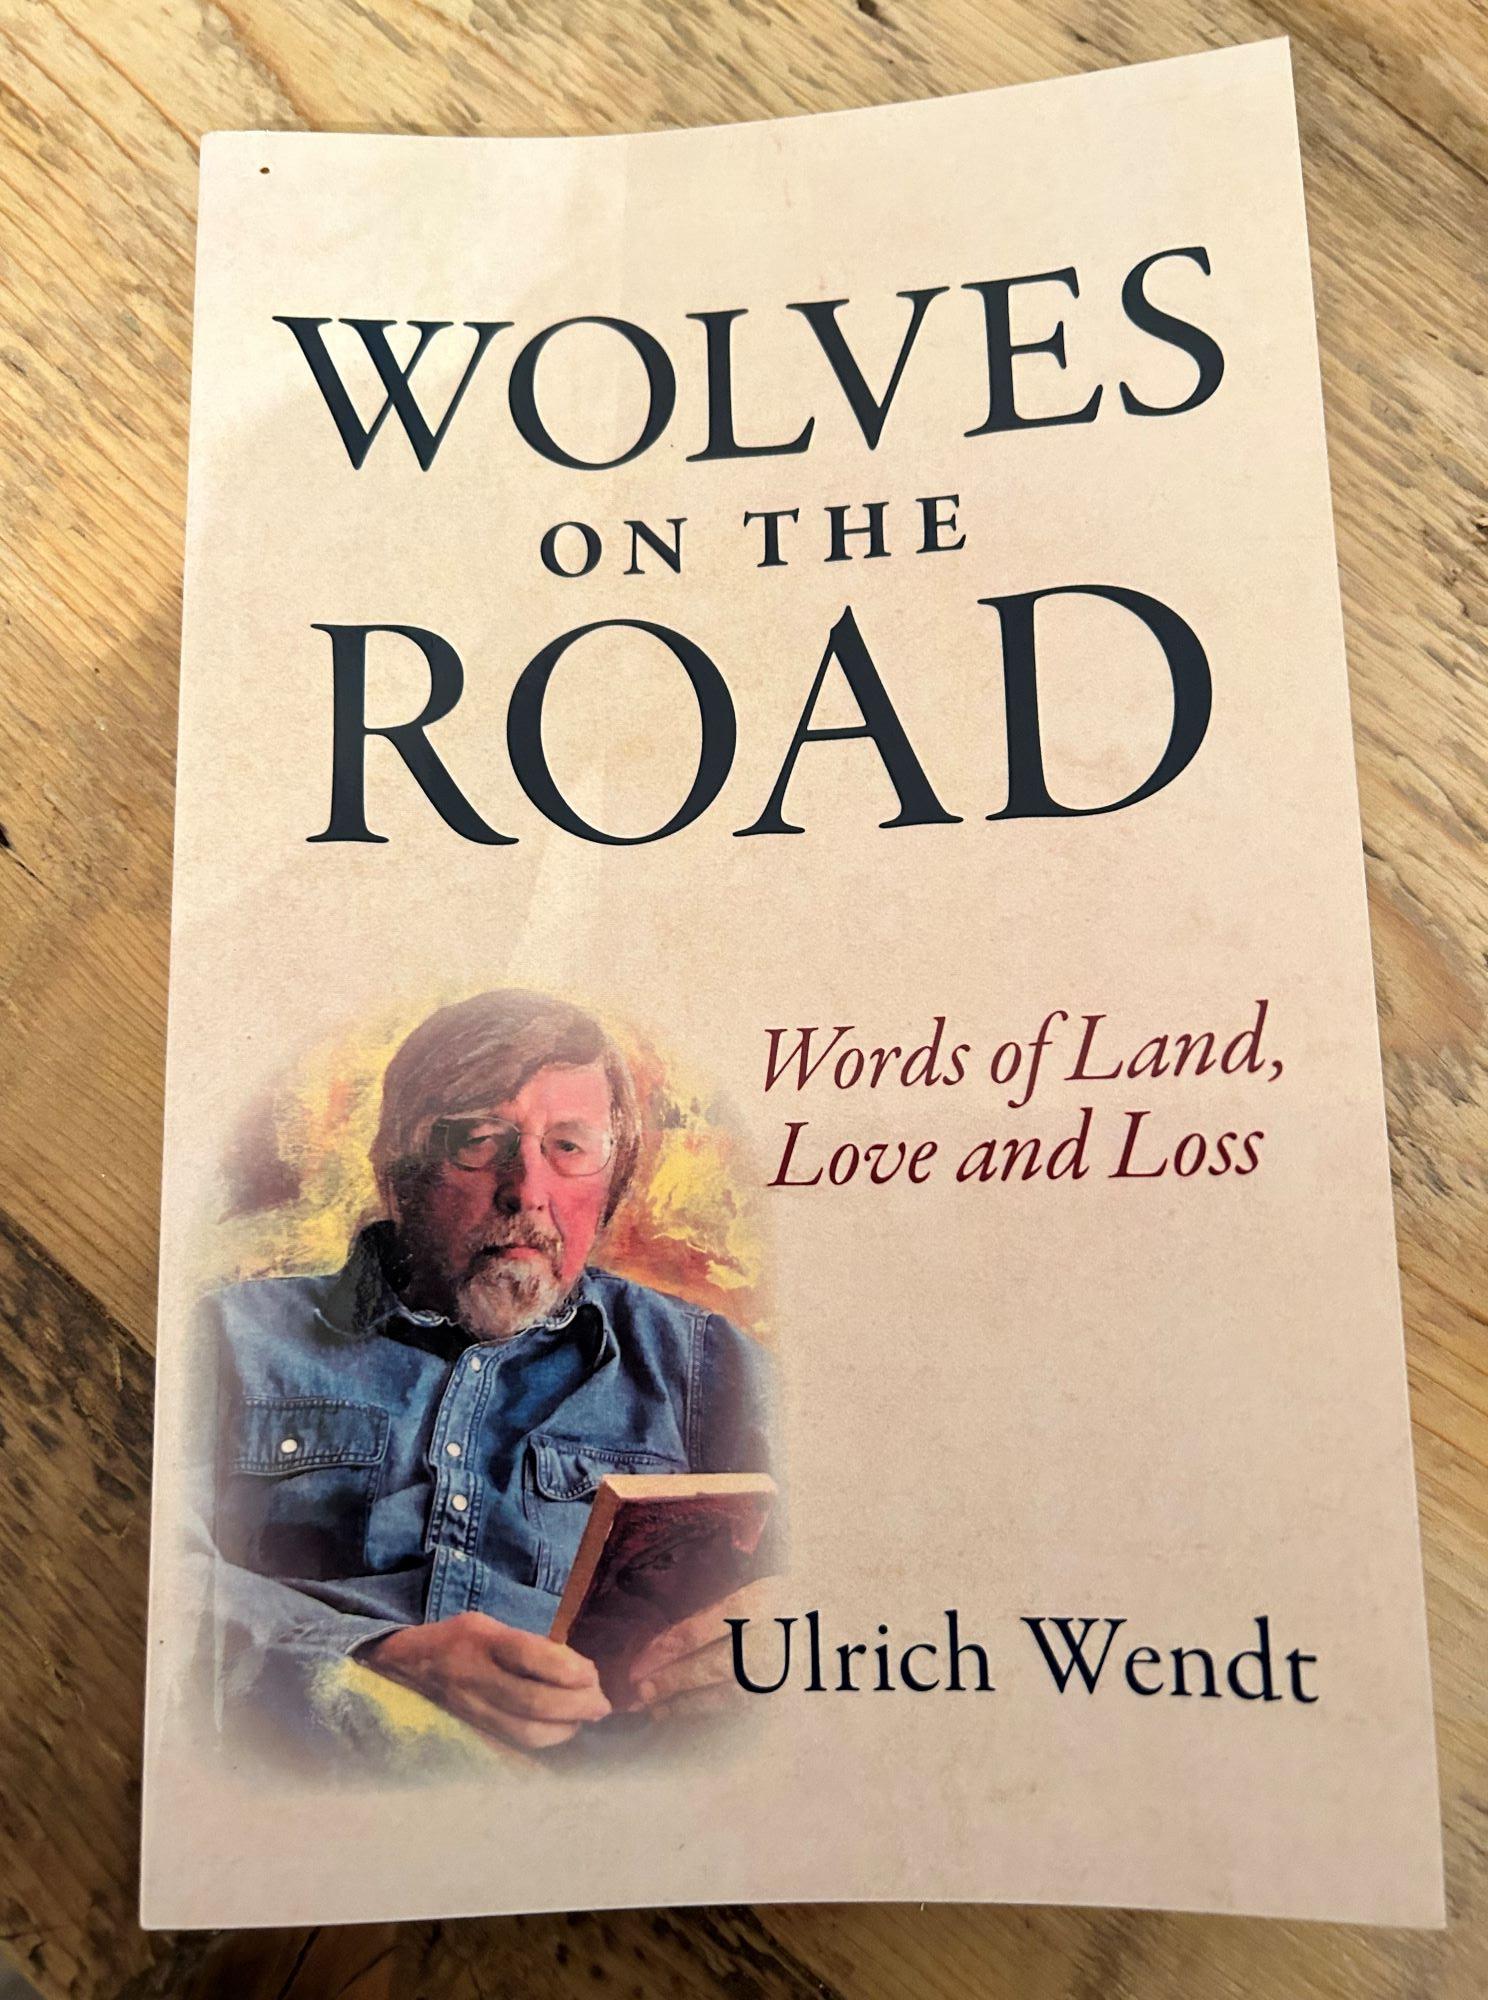 Cover of poetry book "Wolves on the Road" by Ulich Wendt